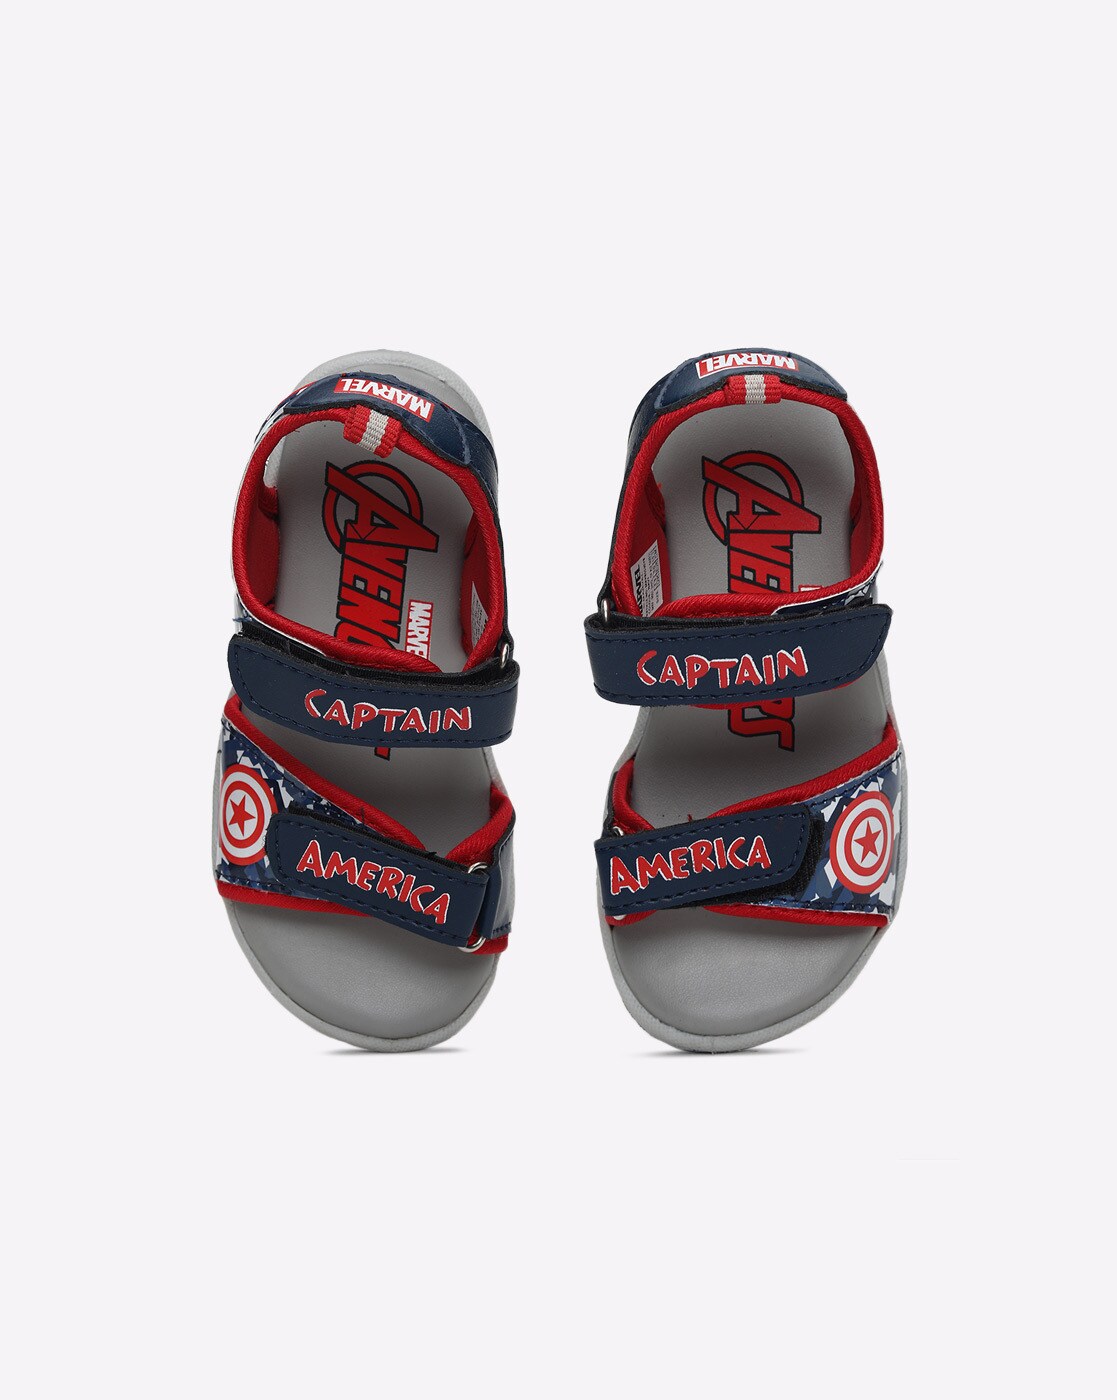 Children Summer Sandals Spiderman Beach Shoes Boys Girls Captain America  Mickey Mouse Minnie Kids Slippers Baby Sandals Toddler